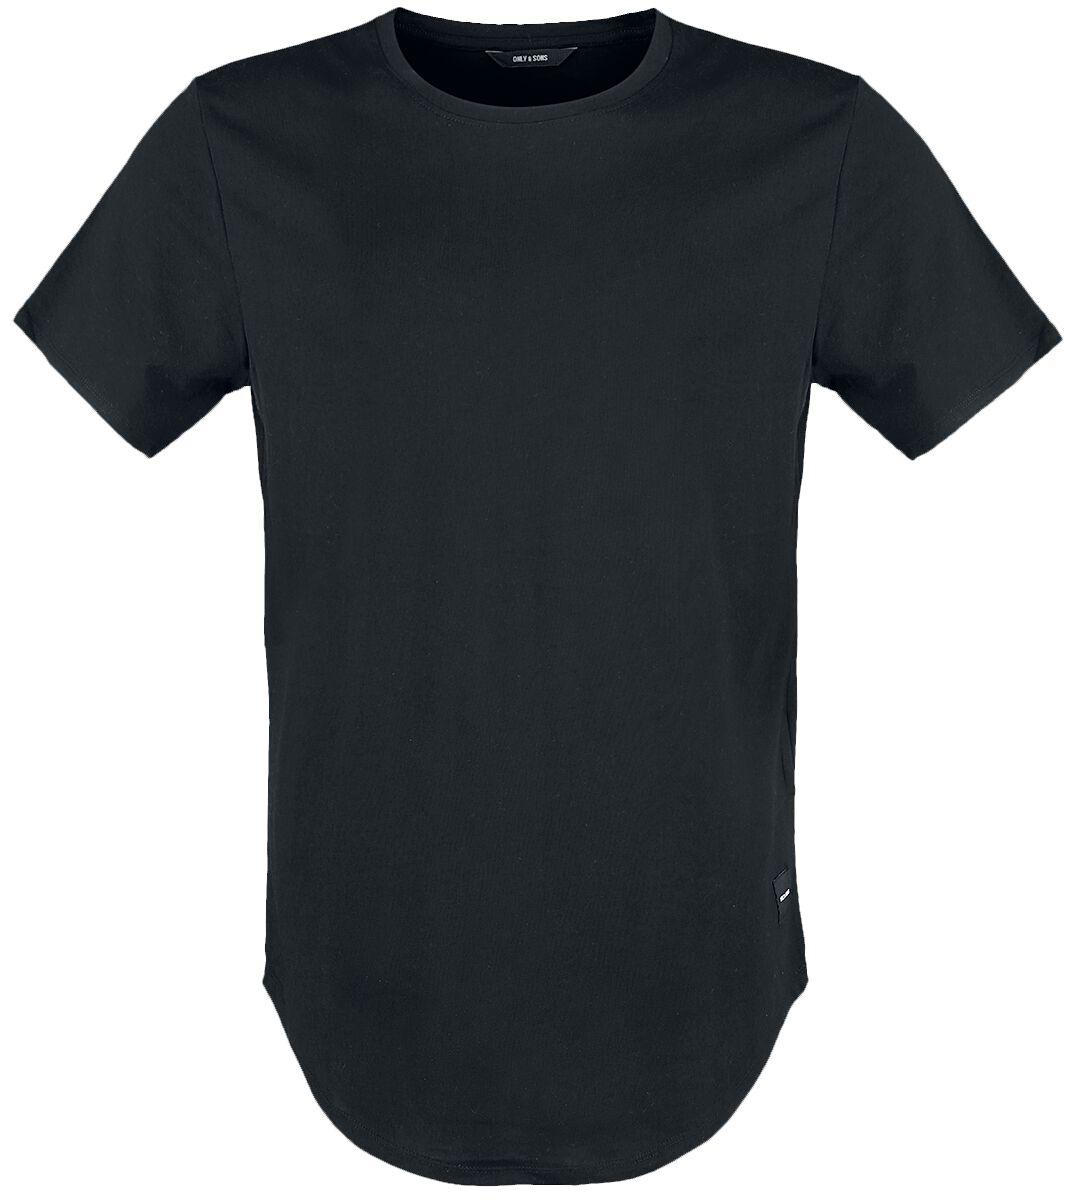 Image of T-Shirt di ONLY and SONS - Matt Life Longy Tee - S a XXL - Uomo - nero